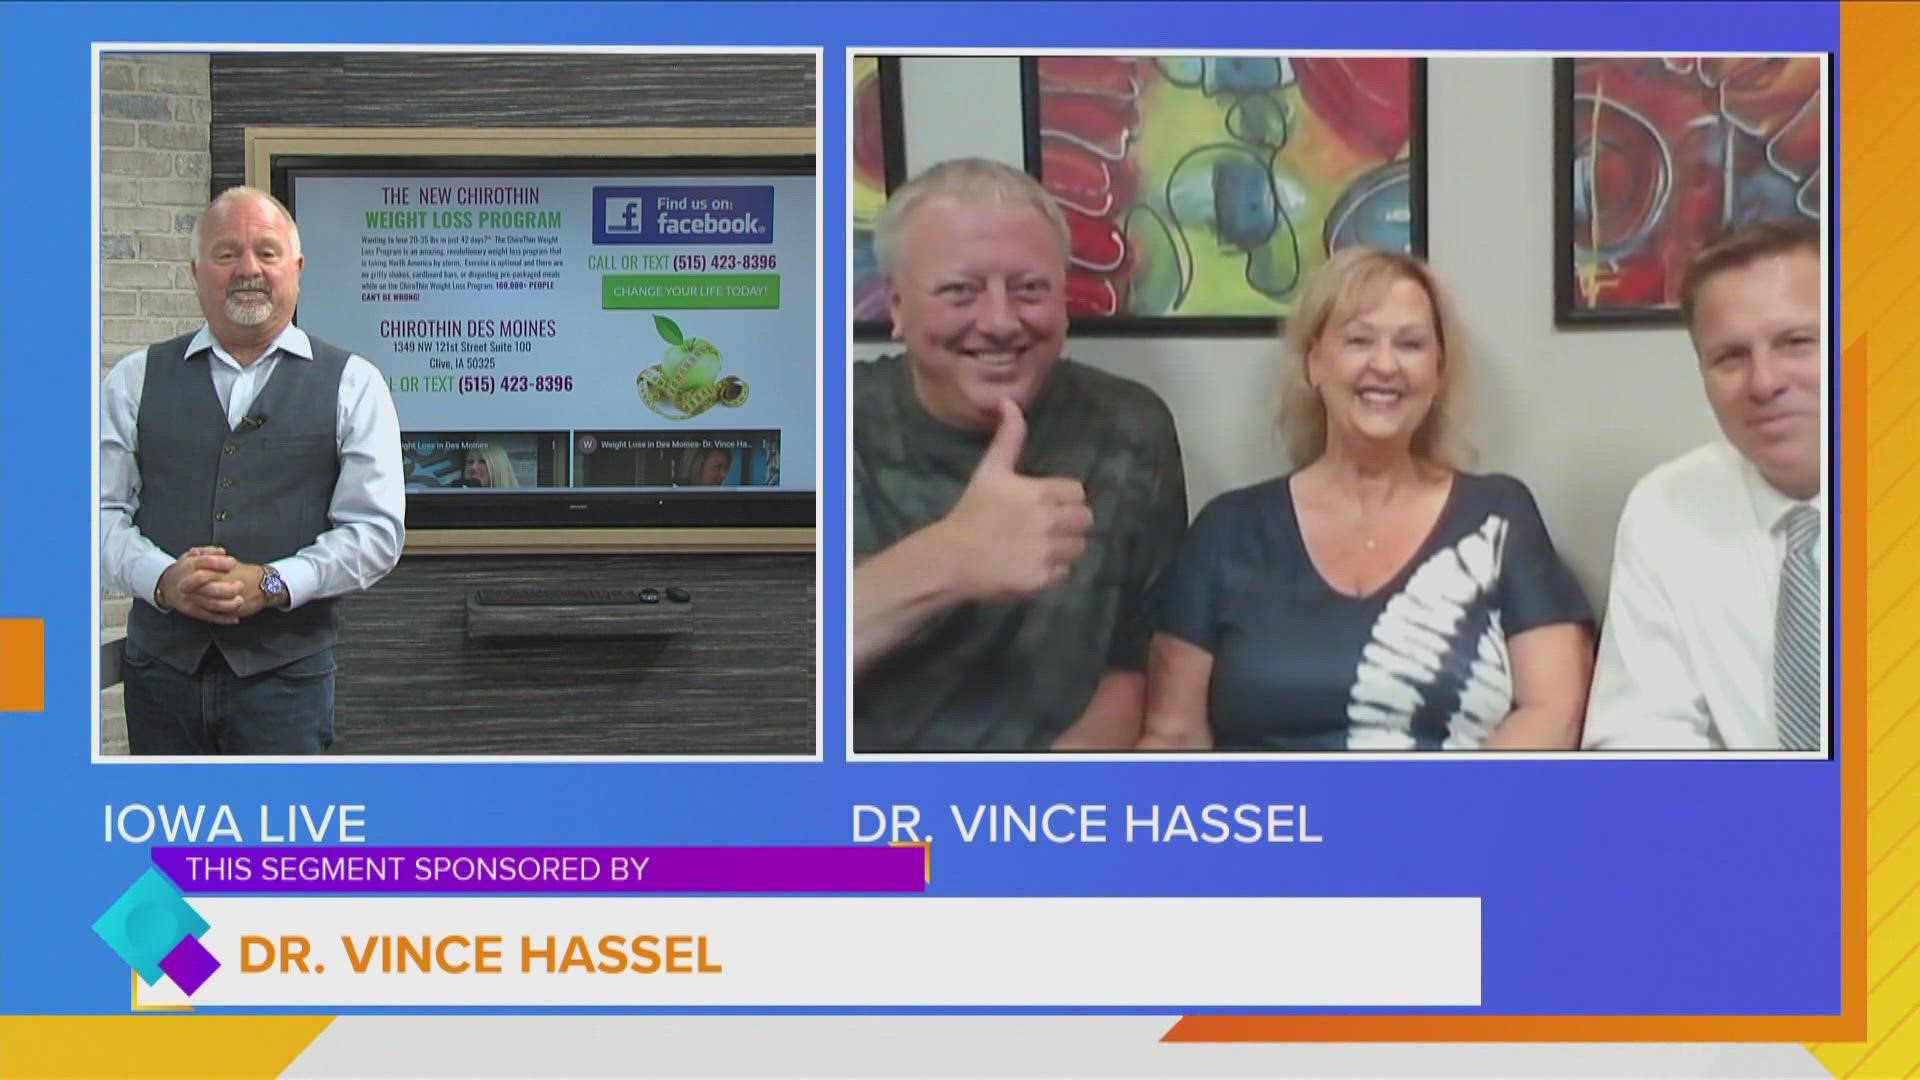 Teresa O'Tool & Dean Lindeman wanted to give Dr. Vince Hassel's ChiroThin Weight Loss program "a shot" and lost 68 pounds as a couple! | Paid Content